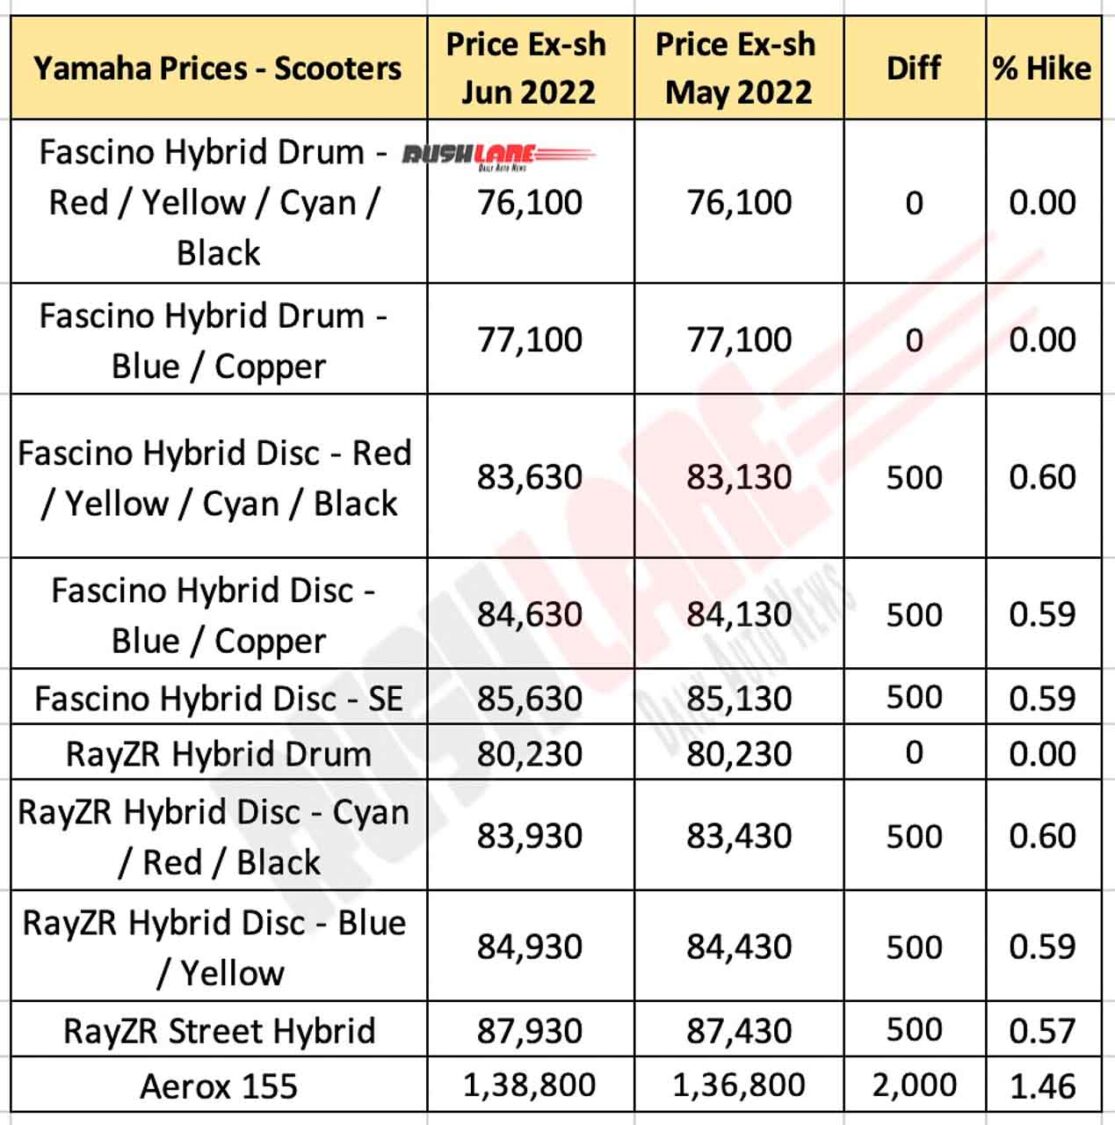 Yamaha Scooter Prices June 2022